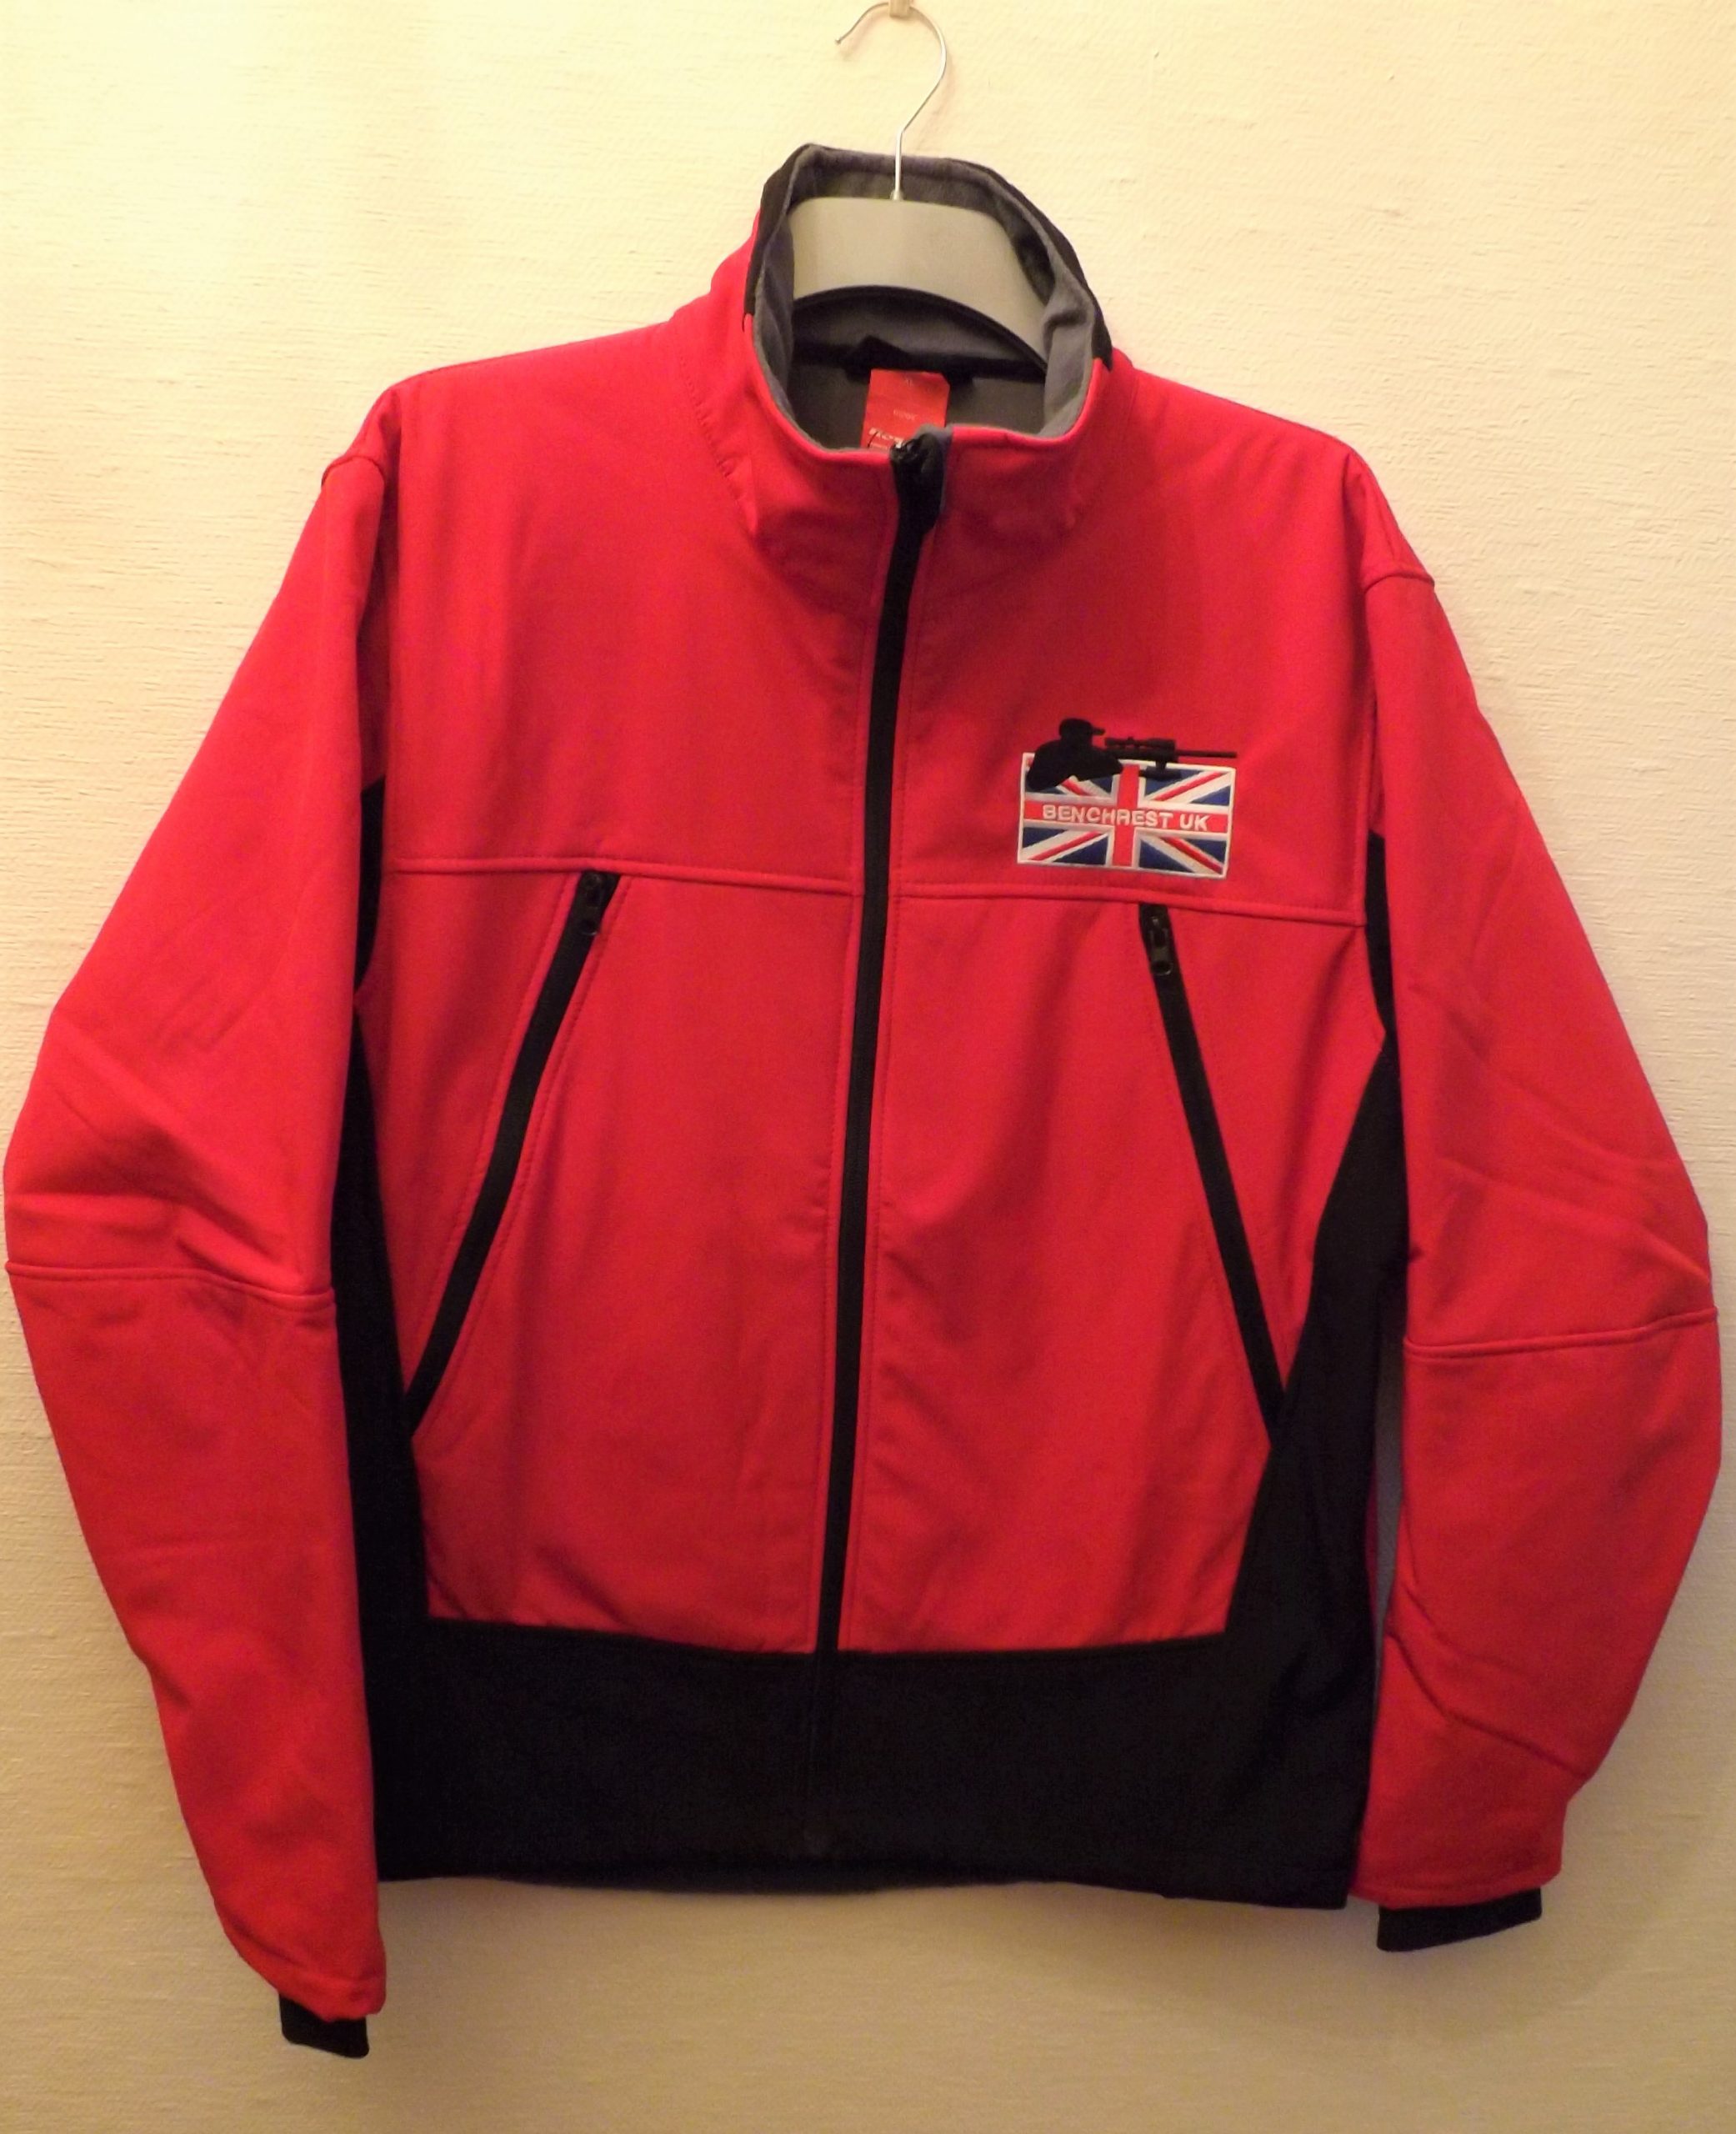 BENCHREST UK SOFT SHELL WATERPROOF BREATHABLE WINDPROOF RED JACKET